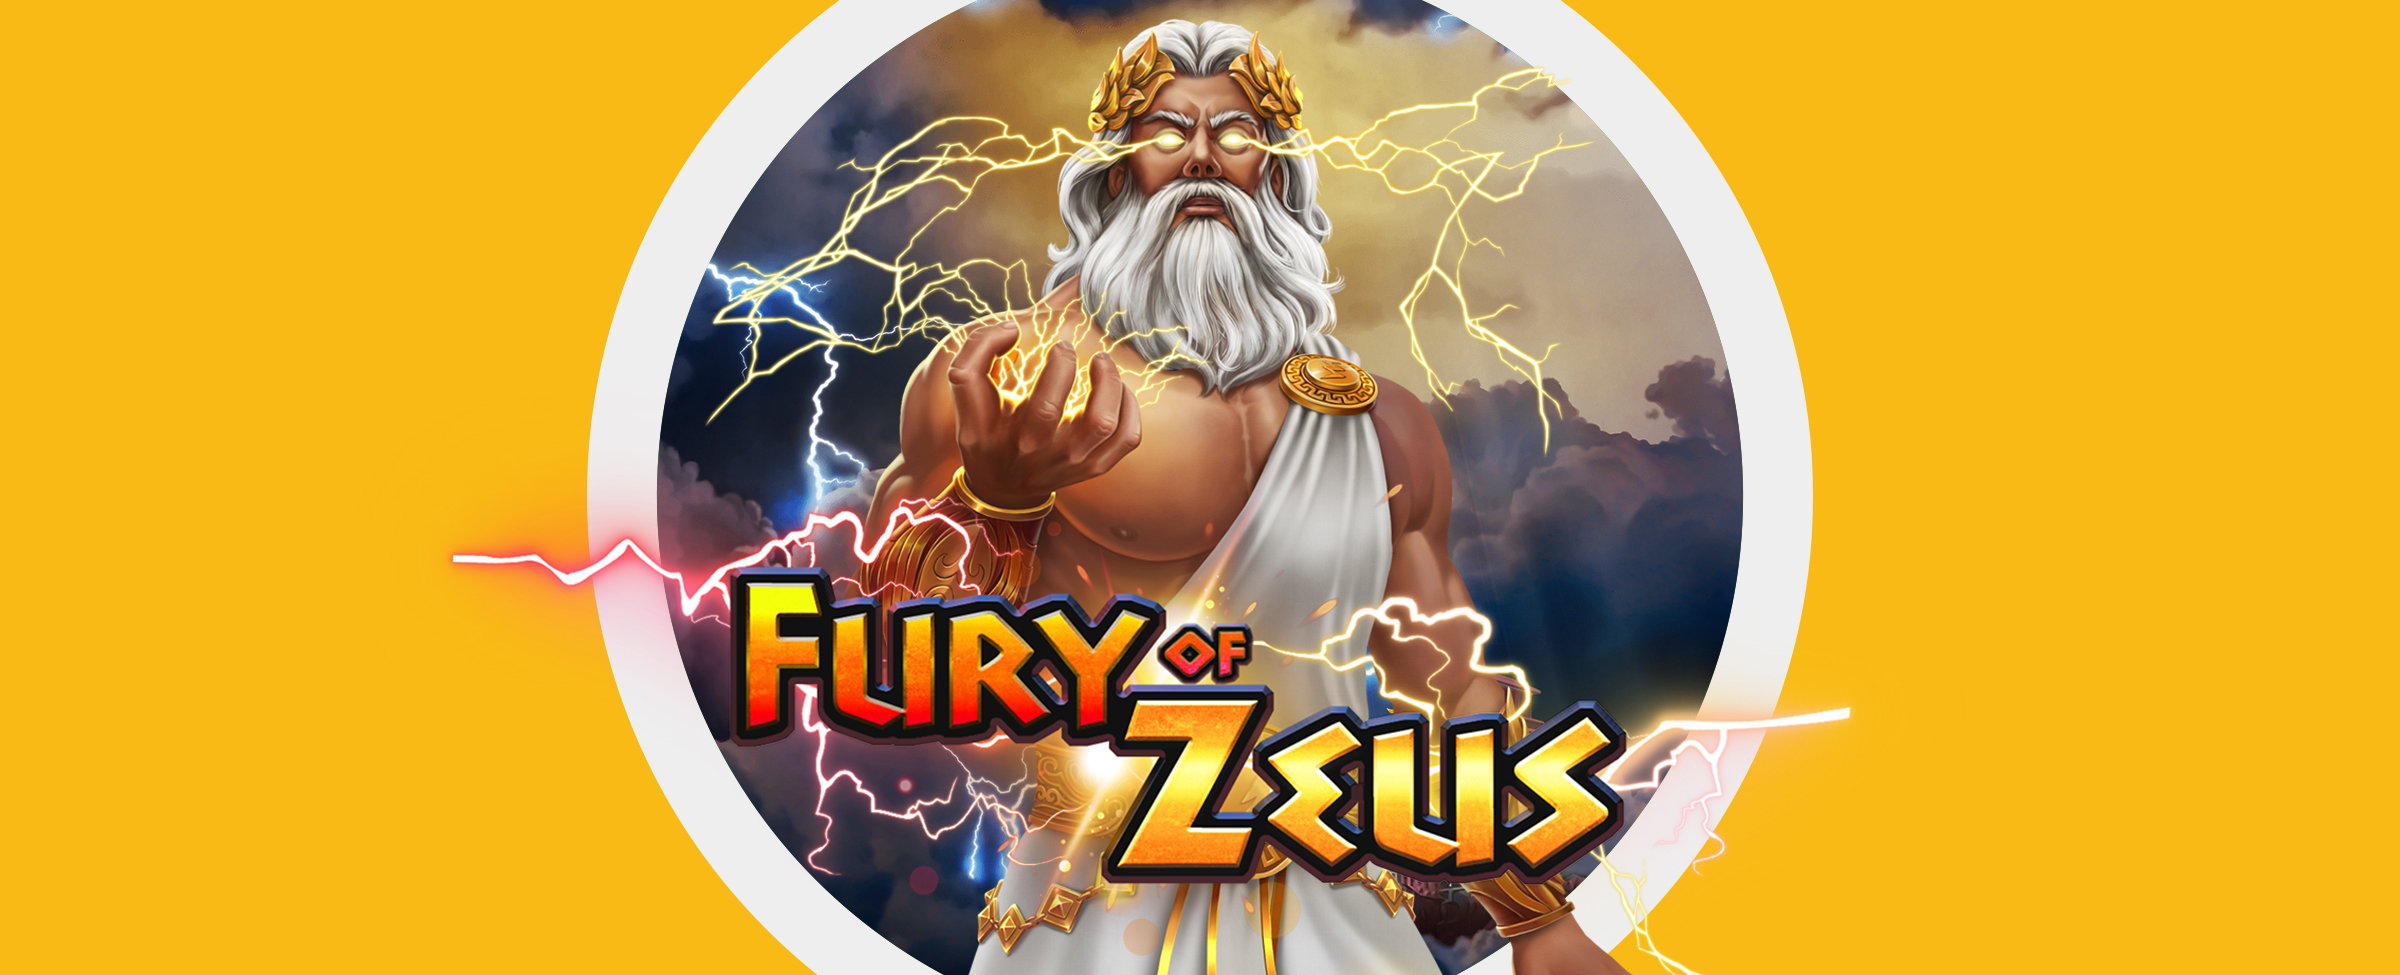 It’s all Greek to me: Fury of Zeus, that is! This fiery pokie game review promises an almighty good time with the gods, so let’s get that lightning cracking